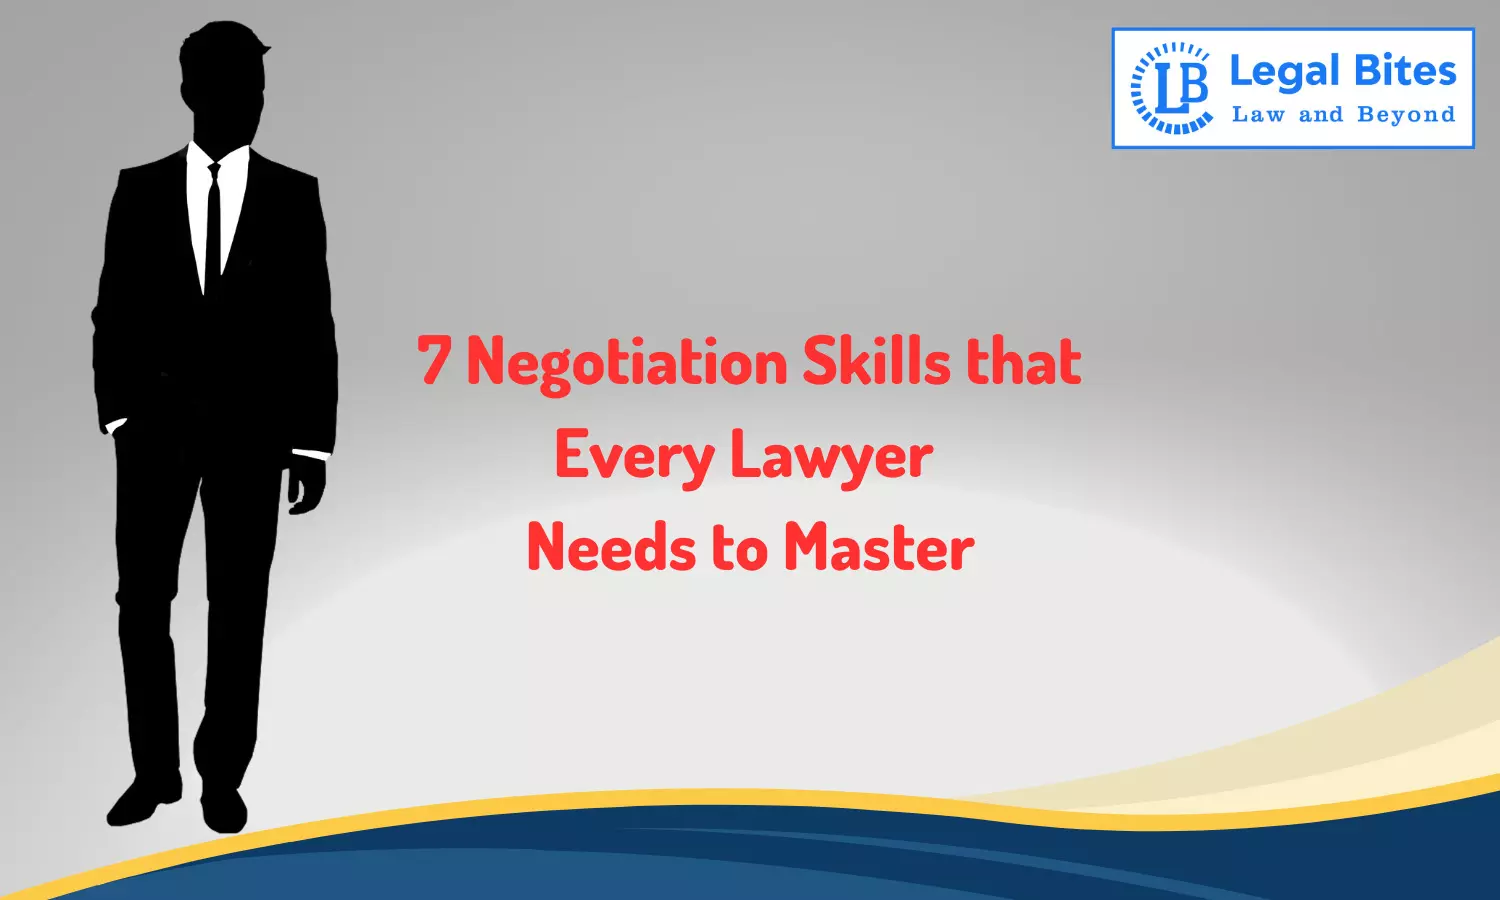 7 Negotiation Skills that Every Lawyer Needs to Master